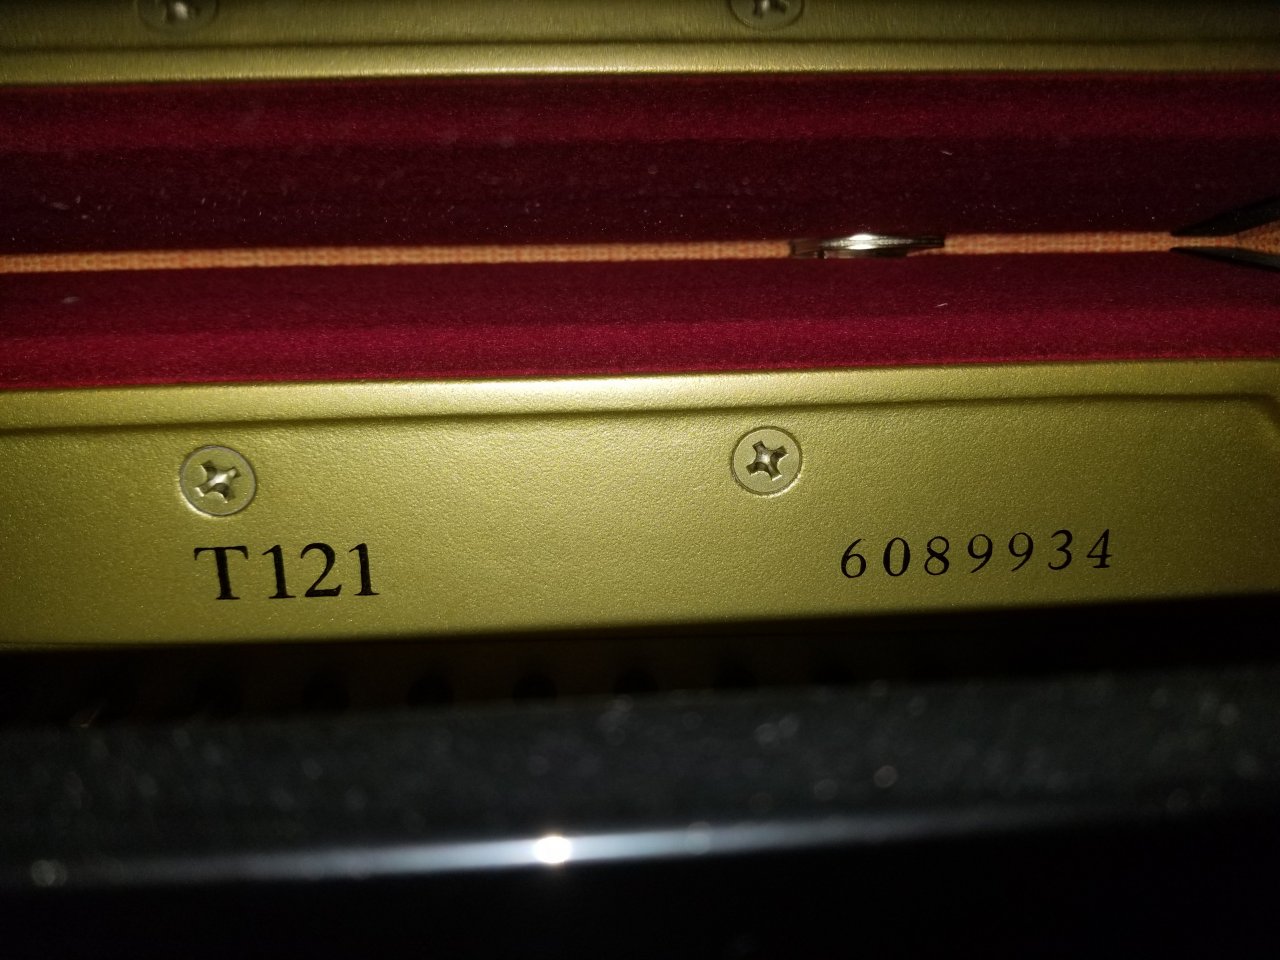 Hello I Have A Upright Yamaha Serial Number 6089934 And It Has T121